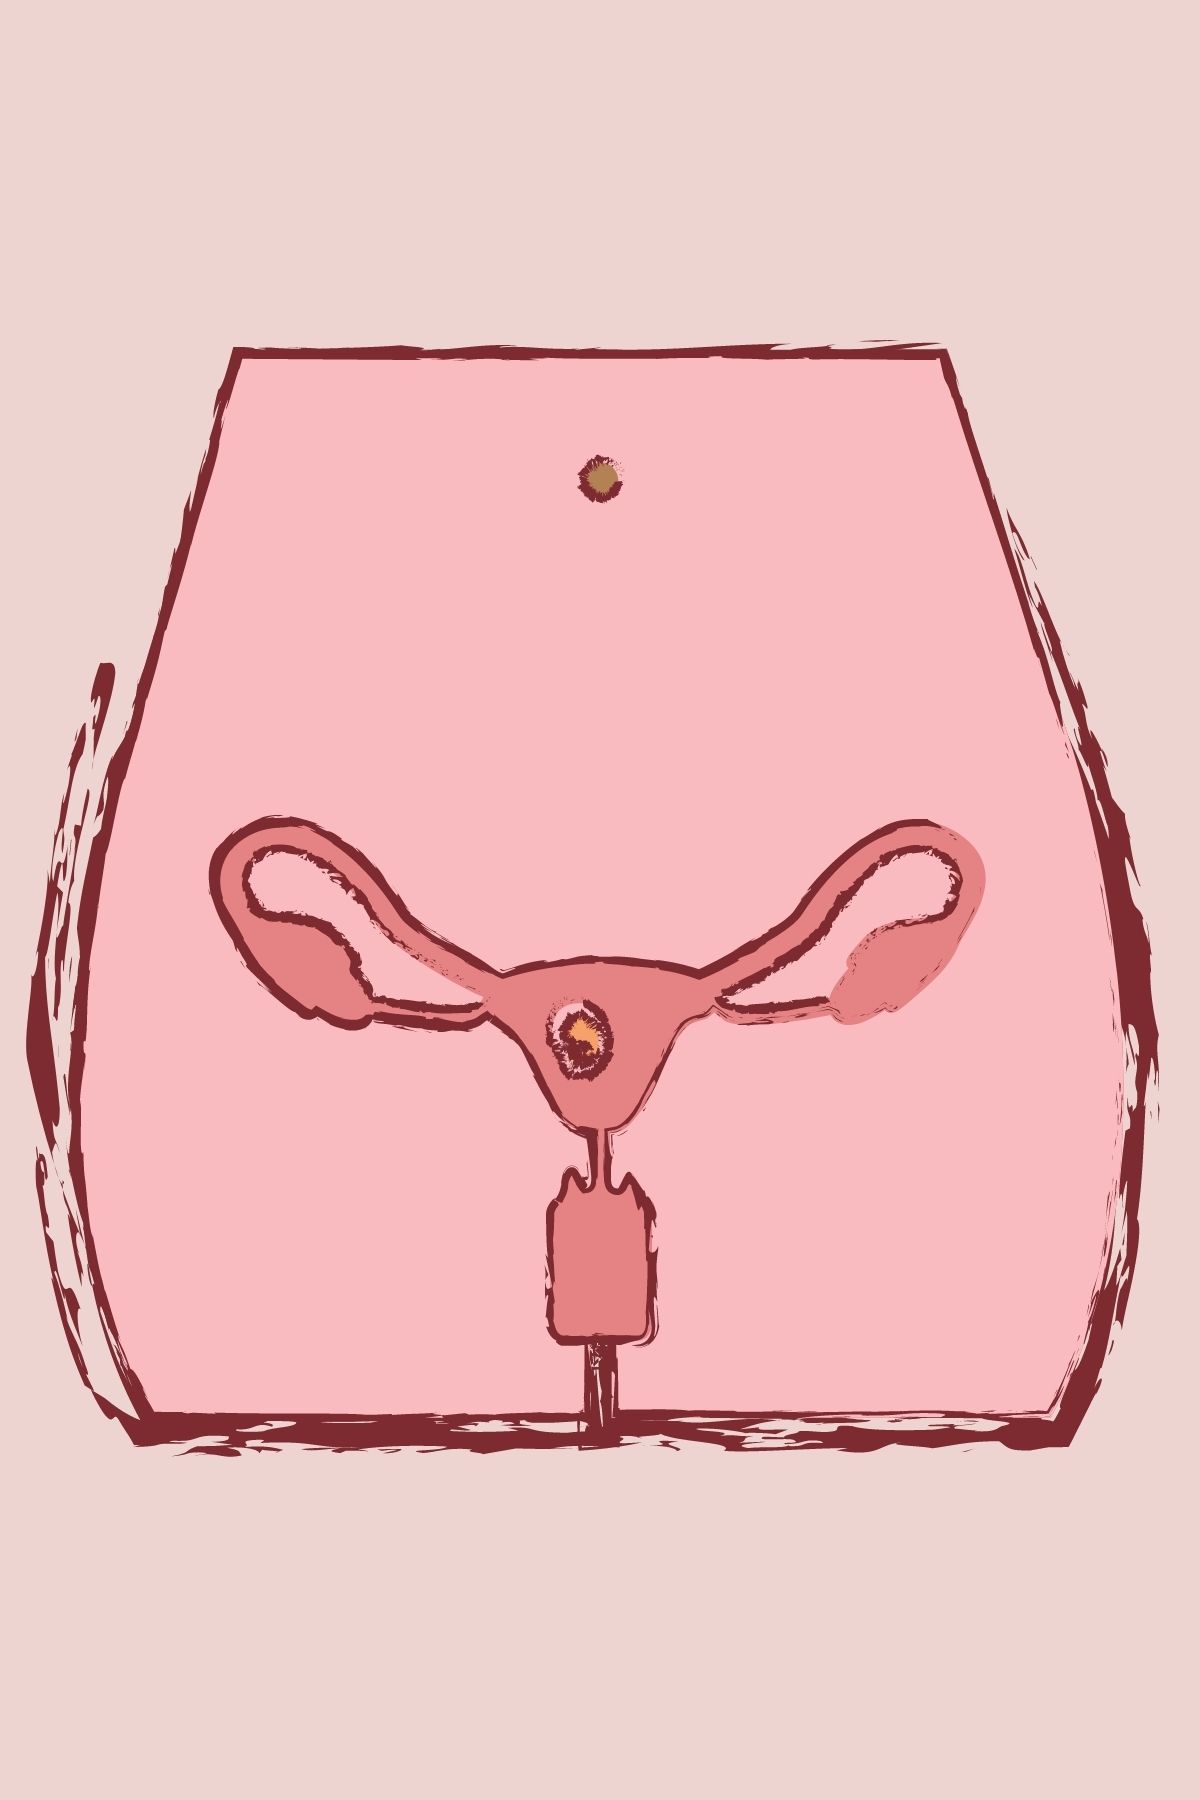 Pink diagram of uterus shows implantation of embryo on peach background.